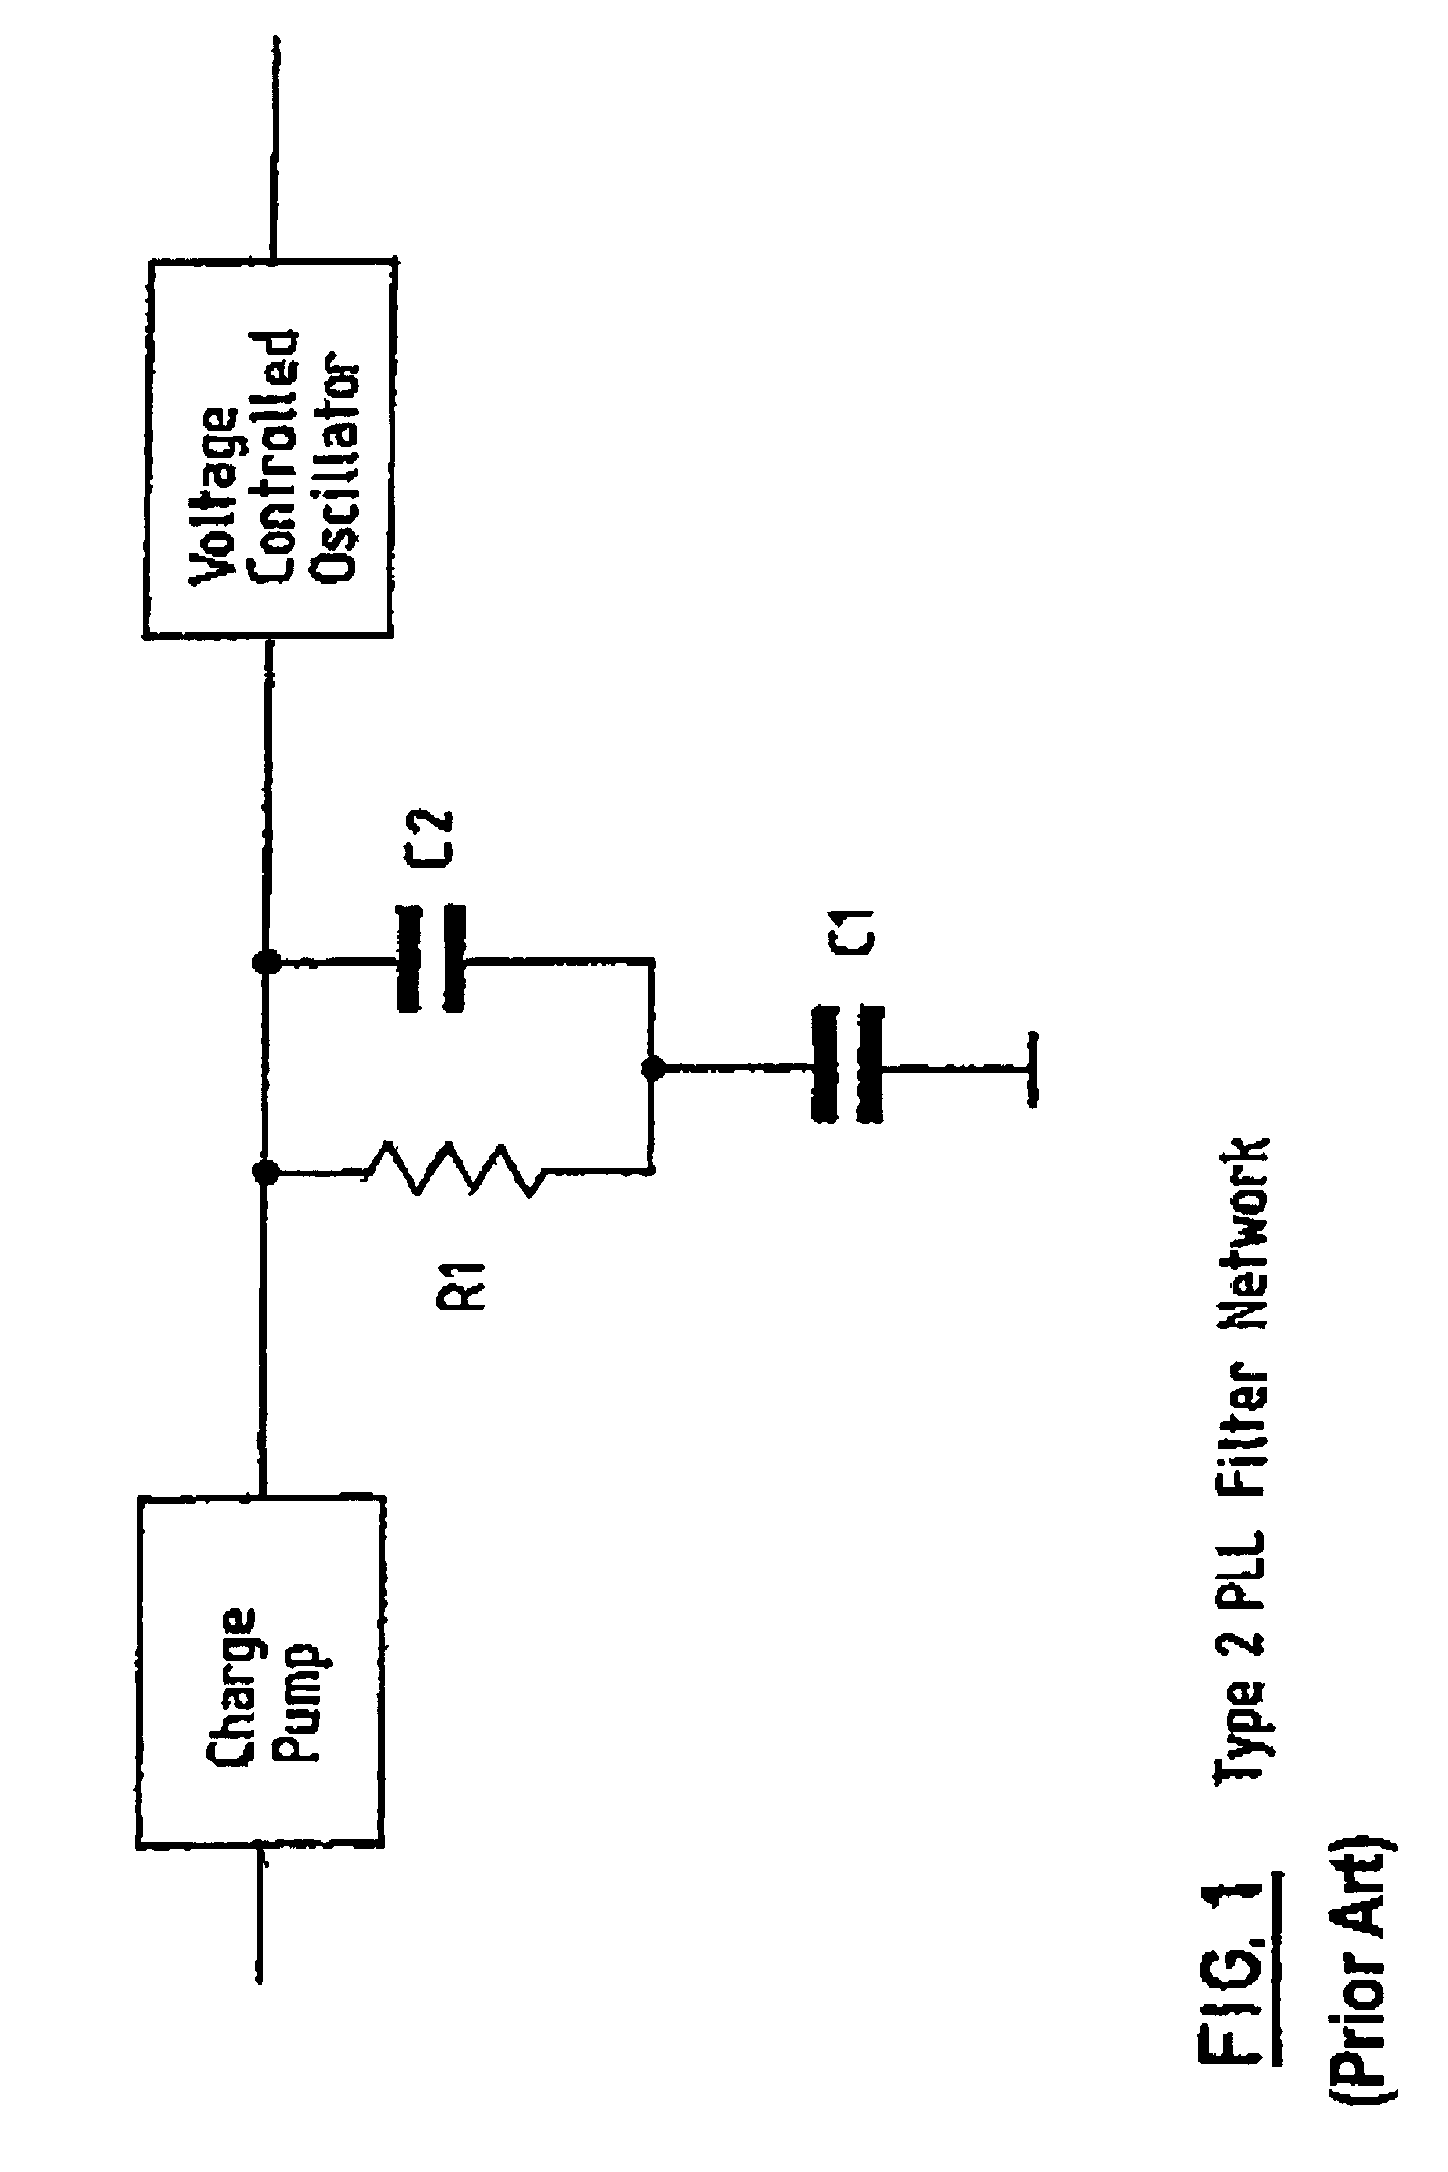 Semiconductor type two phase locked loop filter